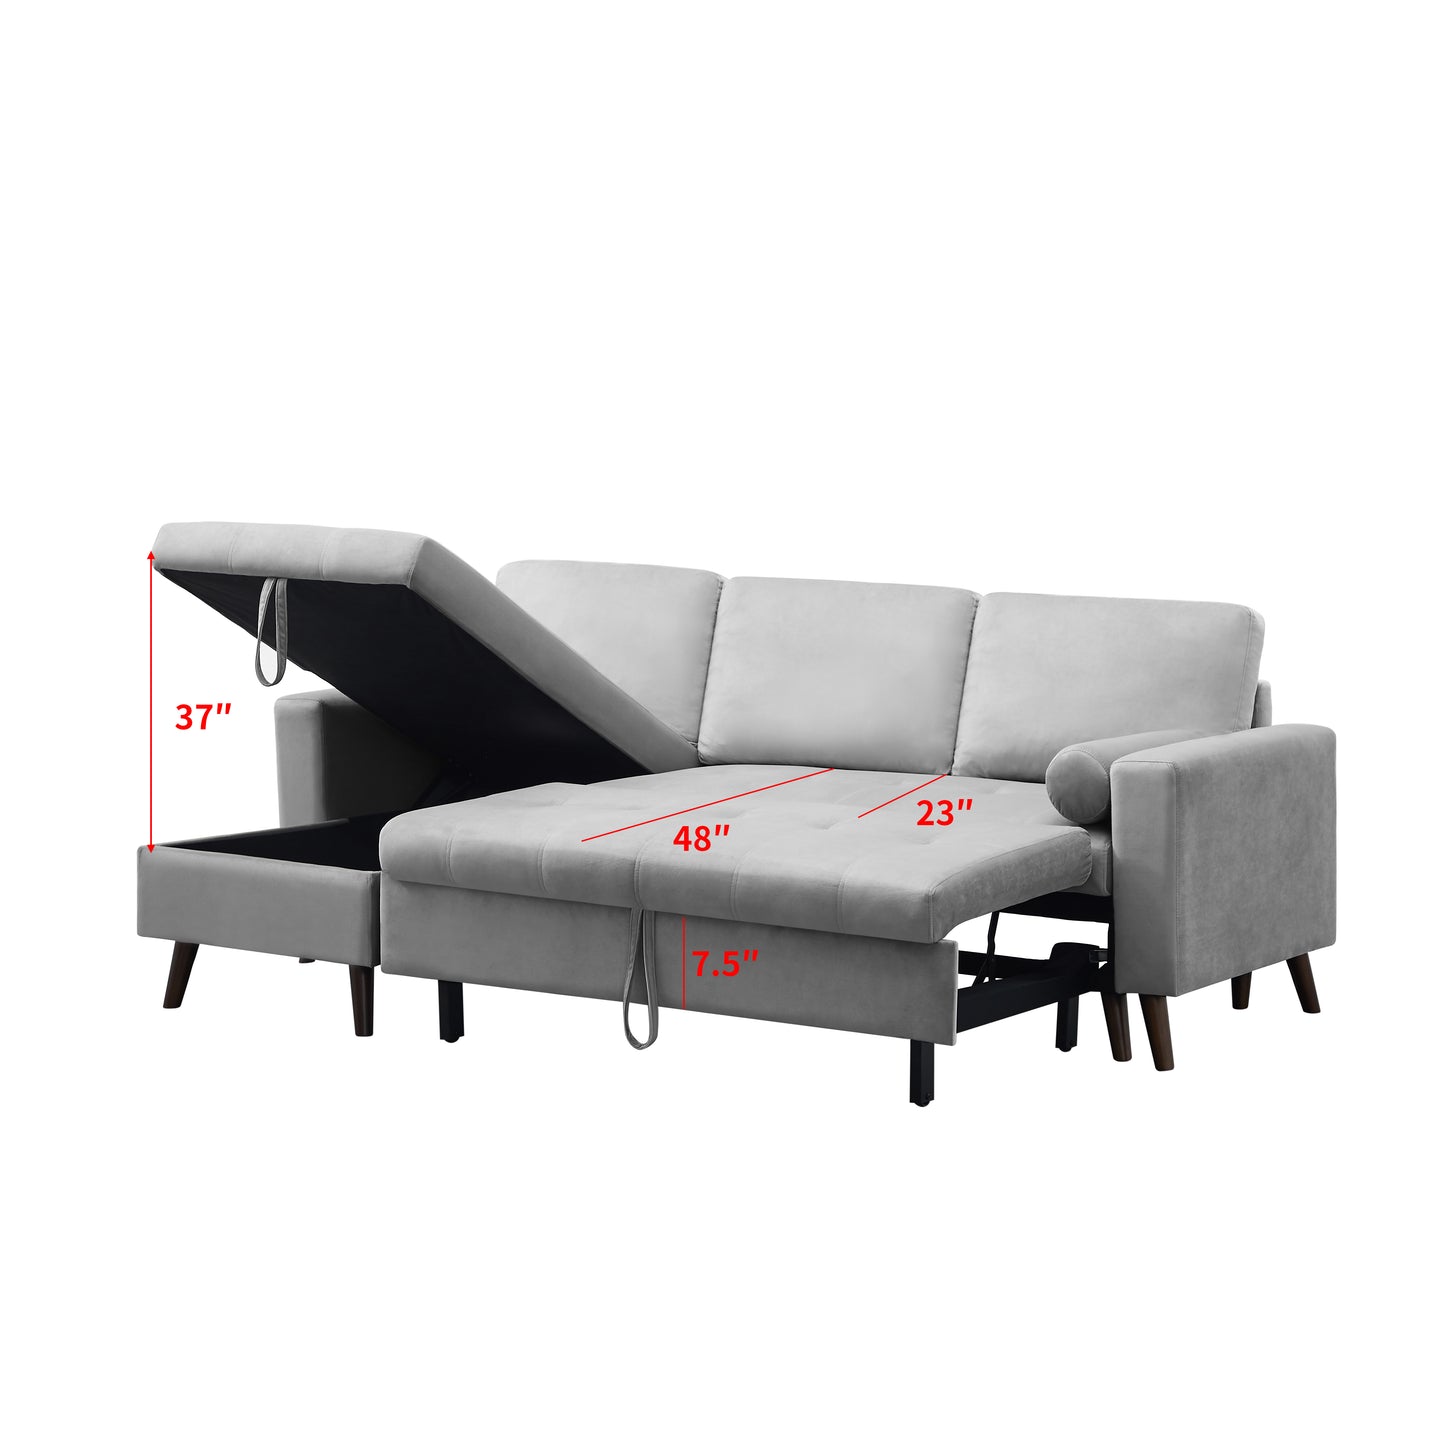 Reversible Pull out Sleeper Sectional Storage Sofa Bed